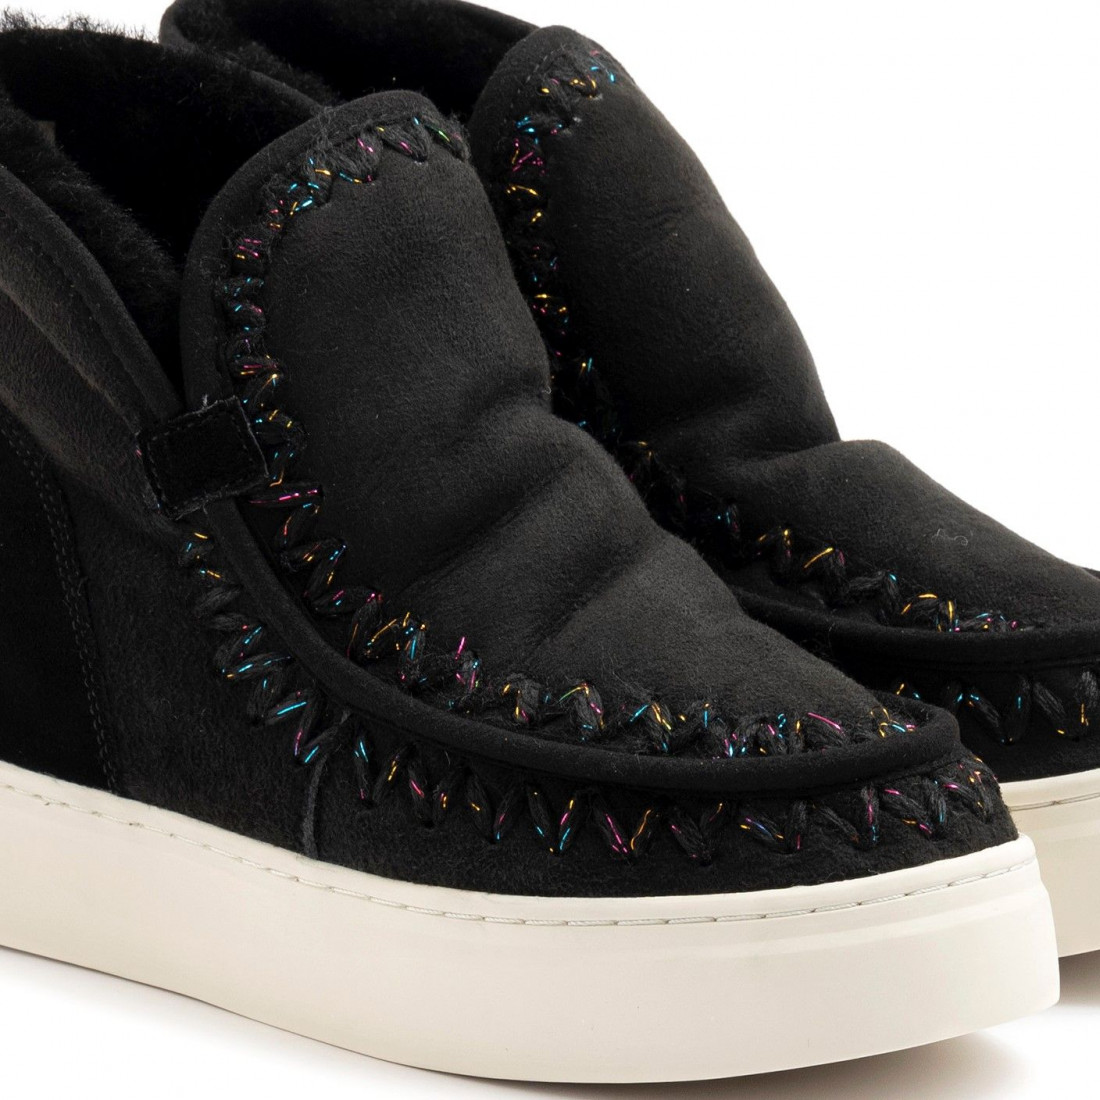 Black suede Movie's ankle boots with faux-fur lining